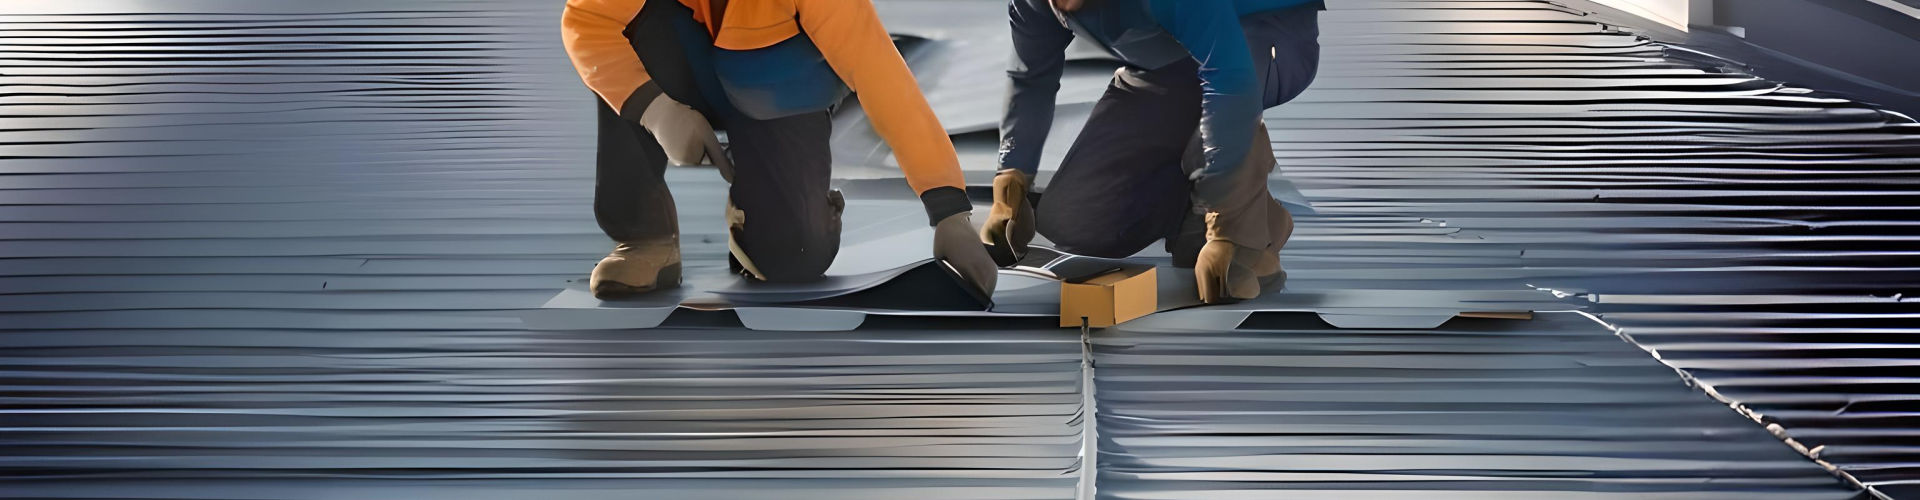 sheet metal roofing system